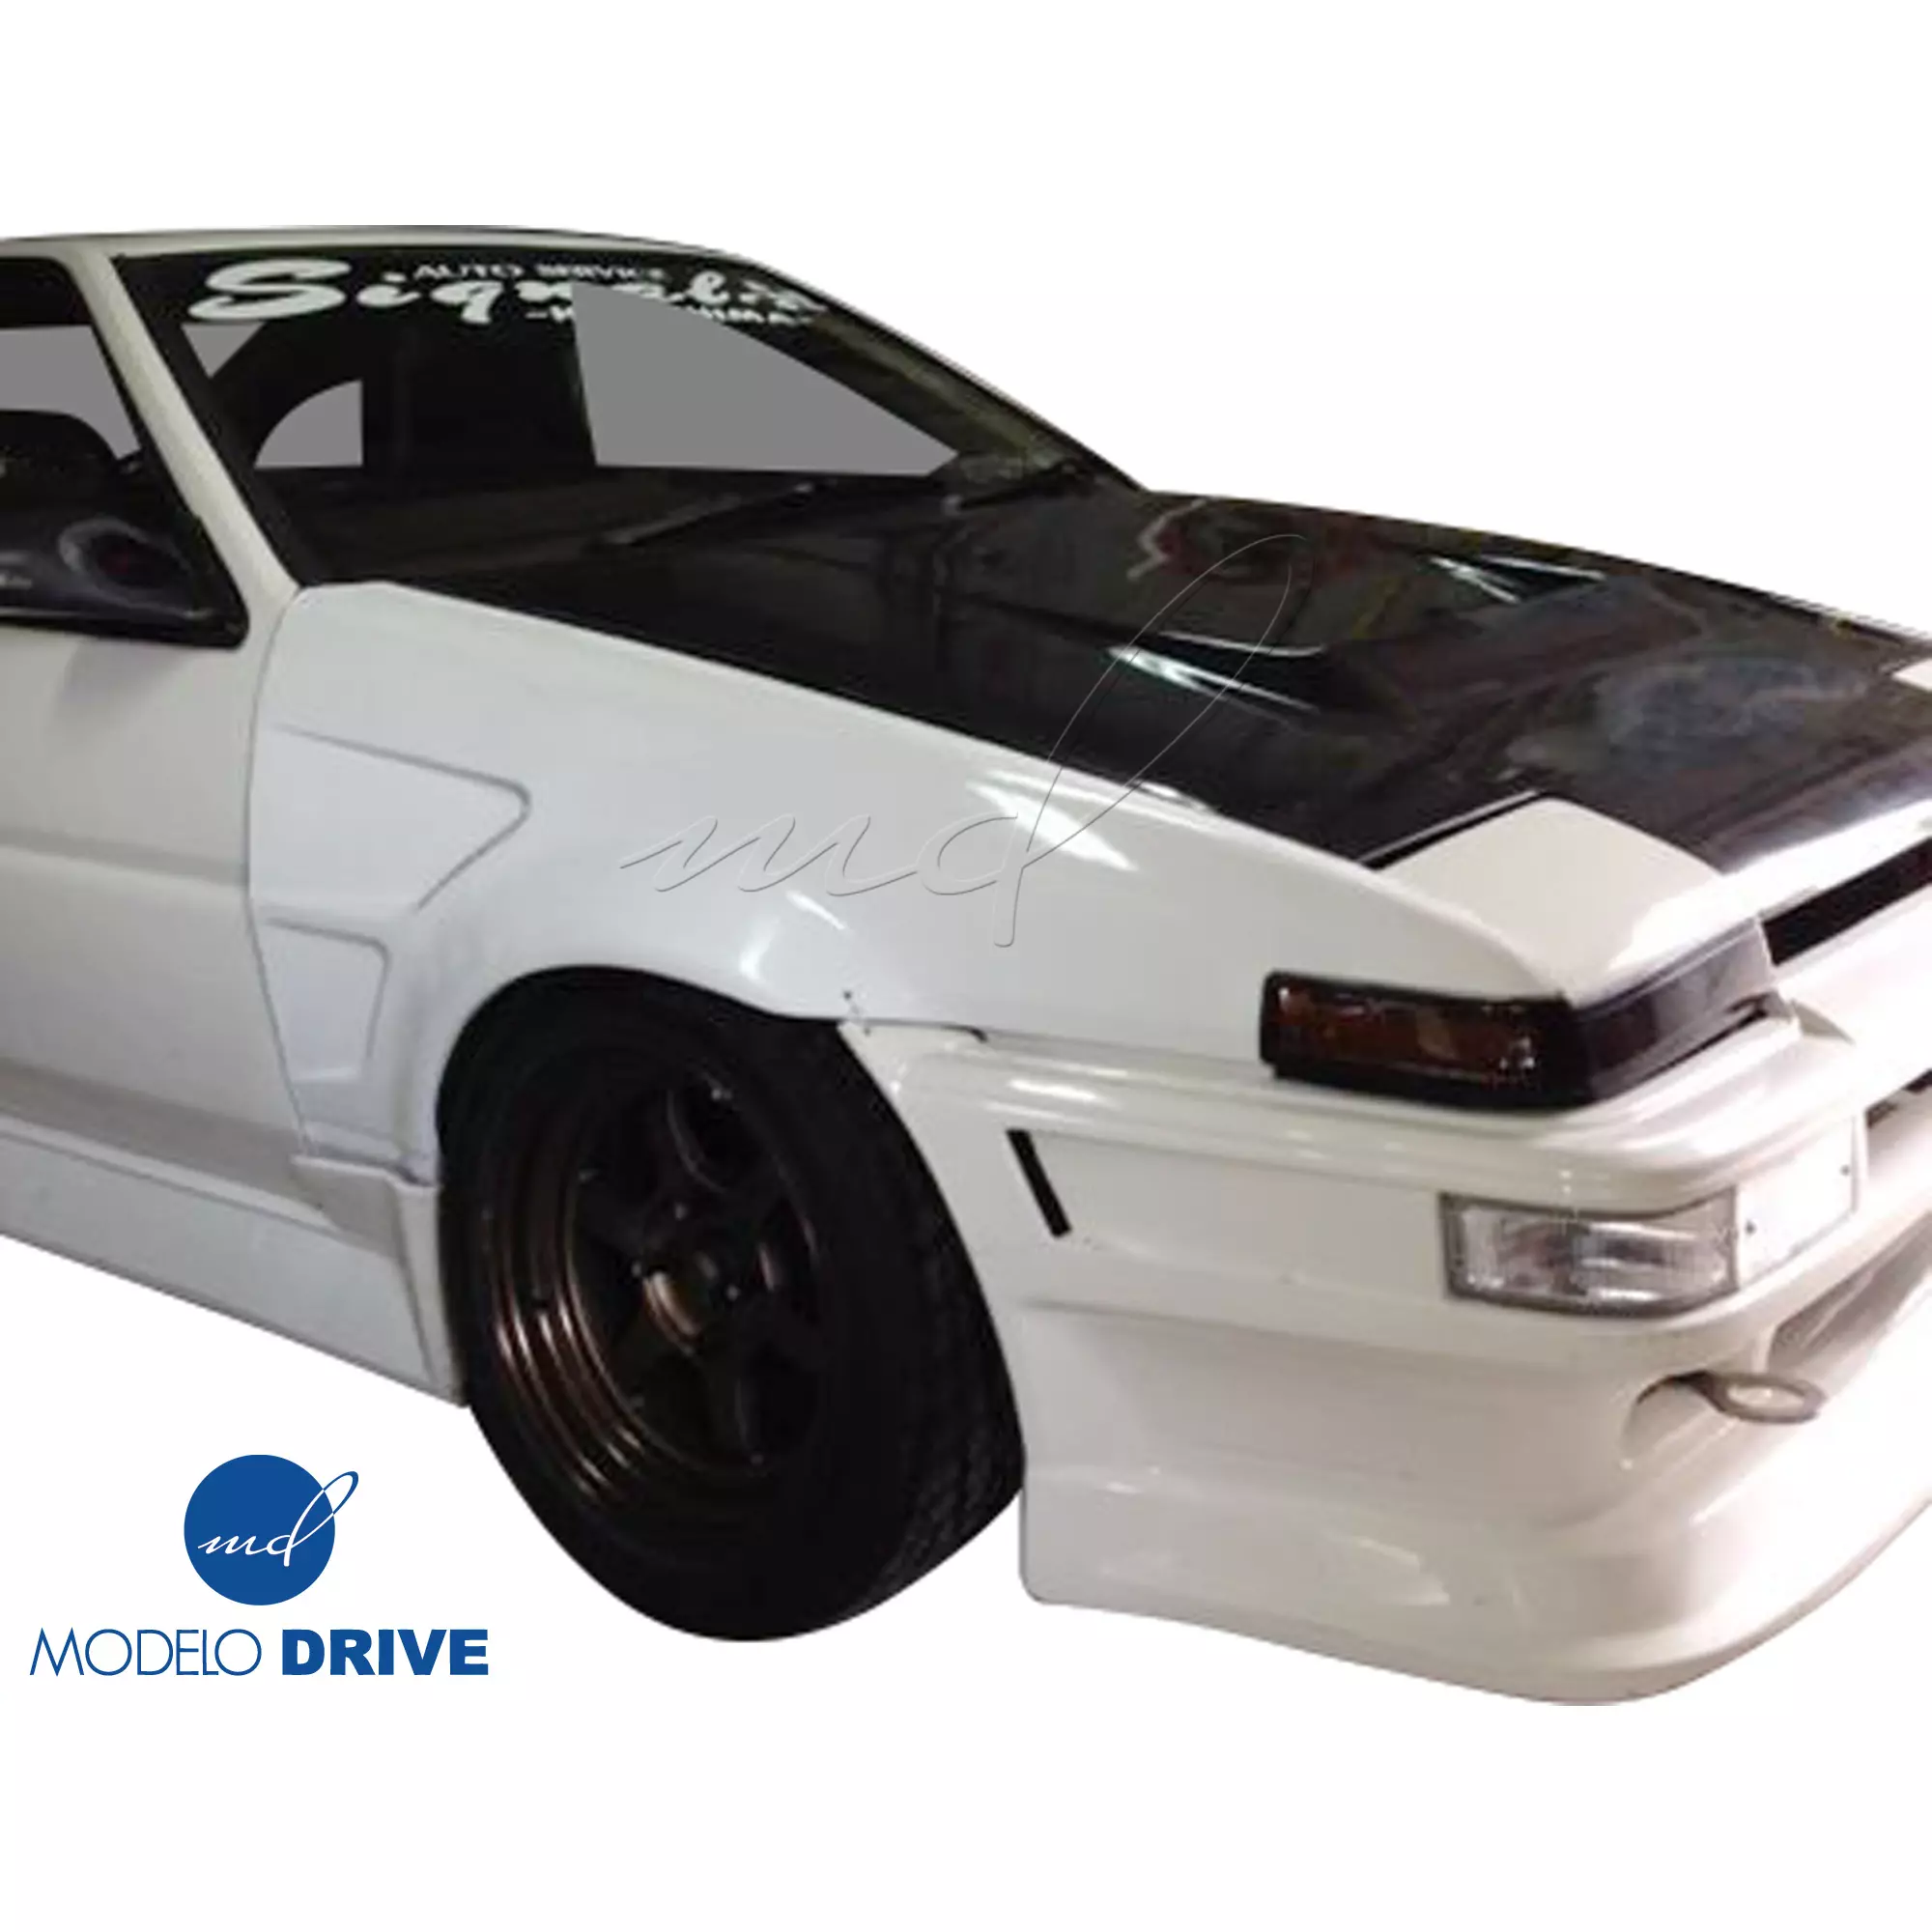 ModeloDrive FRP DMA D1 Wide Body 30mm Fenders Set > Toyota Corolla AE86 1984-1987 > 2dr Coupe - Image 6